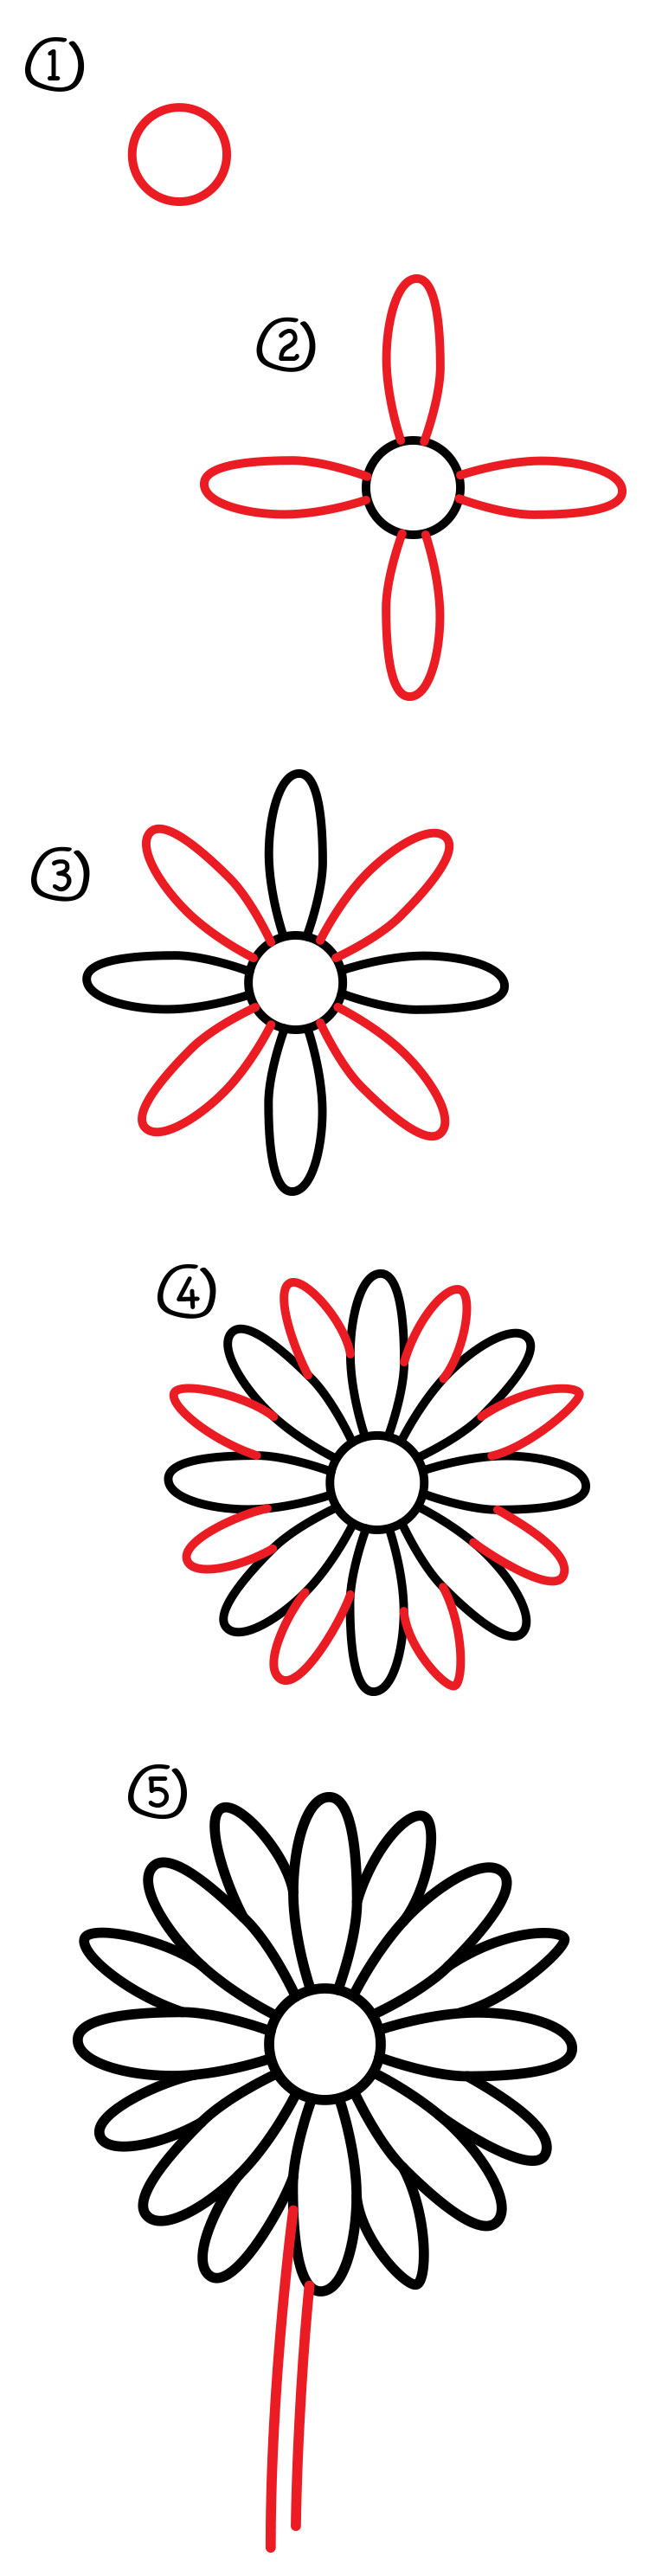 How To Draw A Daisy Flower - Art For Kids Hub